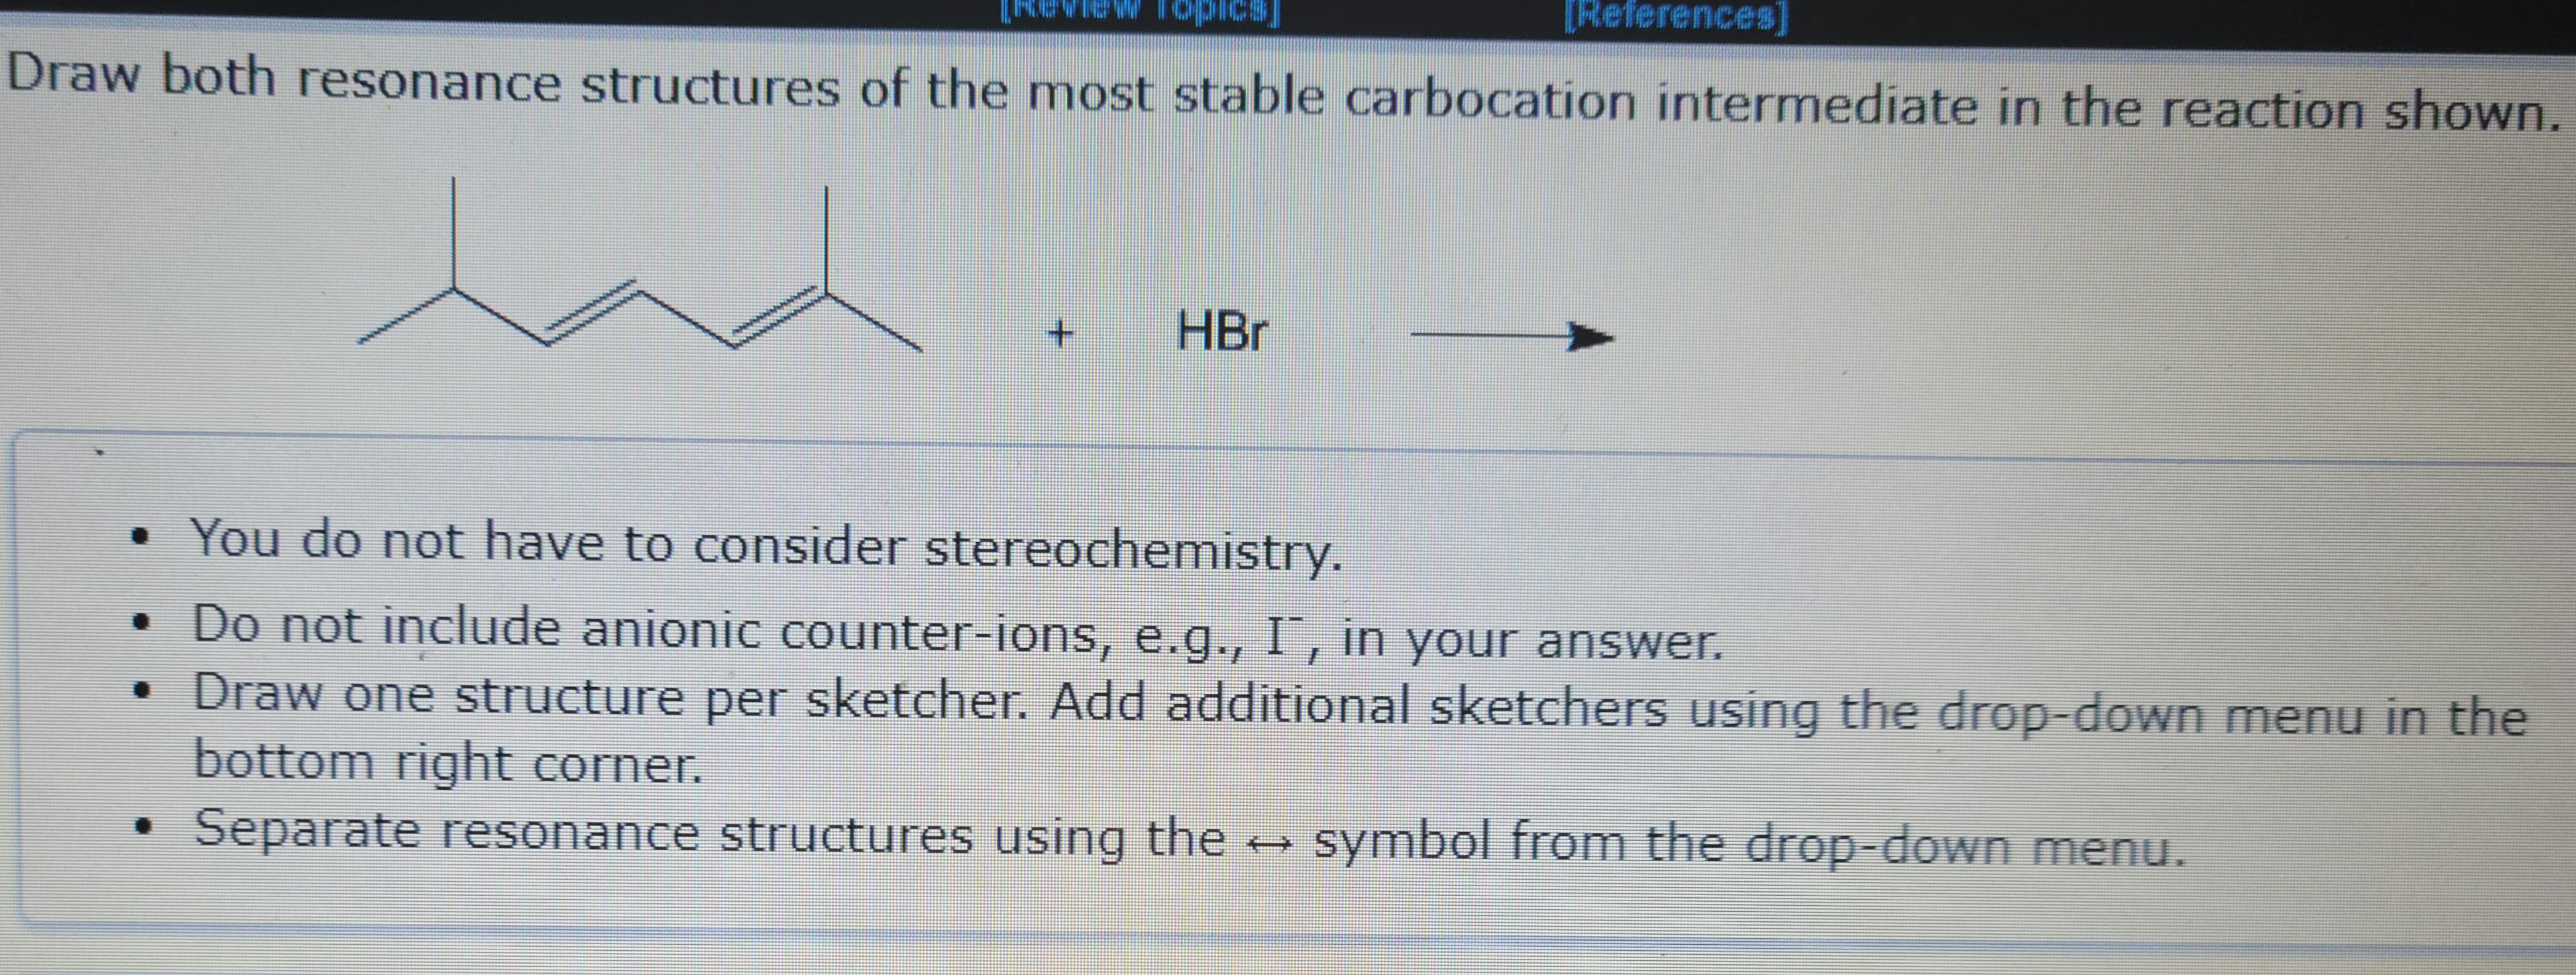 Draw both resonance structures of the most stable carbocation intermediate in the reaction shown.
la
+
HBr
[References]
• You do not have to consider stereochemistry.
•
Do not include anionic counter-ions, e.g., I", in your answer.
Draw one structure per sketcher. Add additional sketchers using the drop-down menu in the
bottom right corner.
Separate resonance structures using the
symbol from the drop-down menu.
Pax